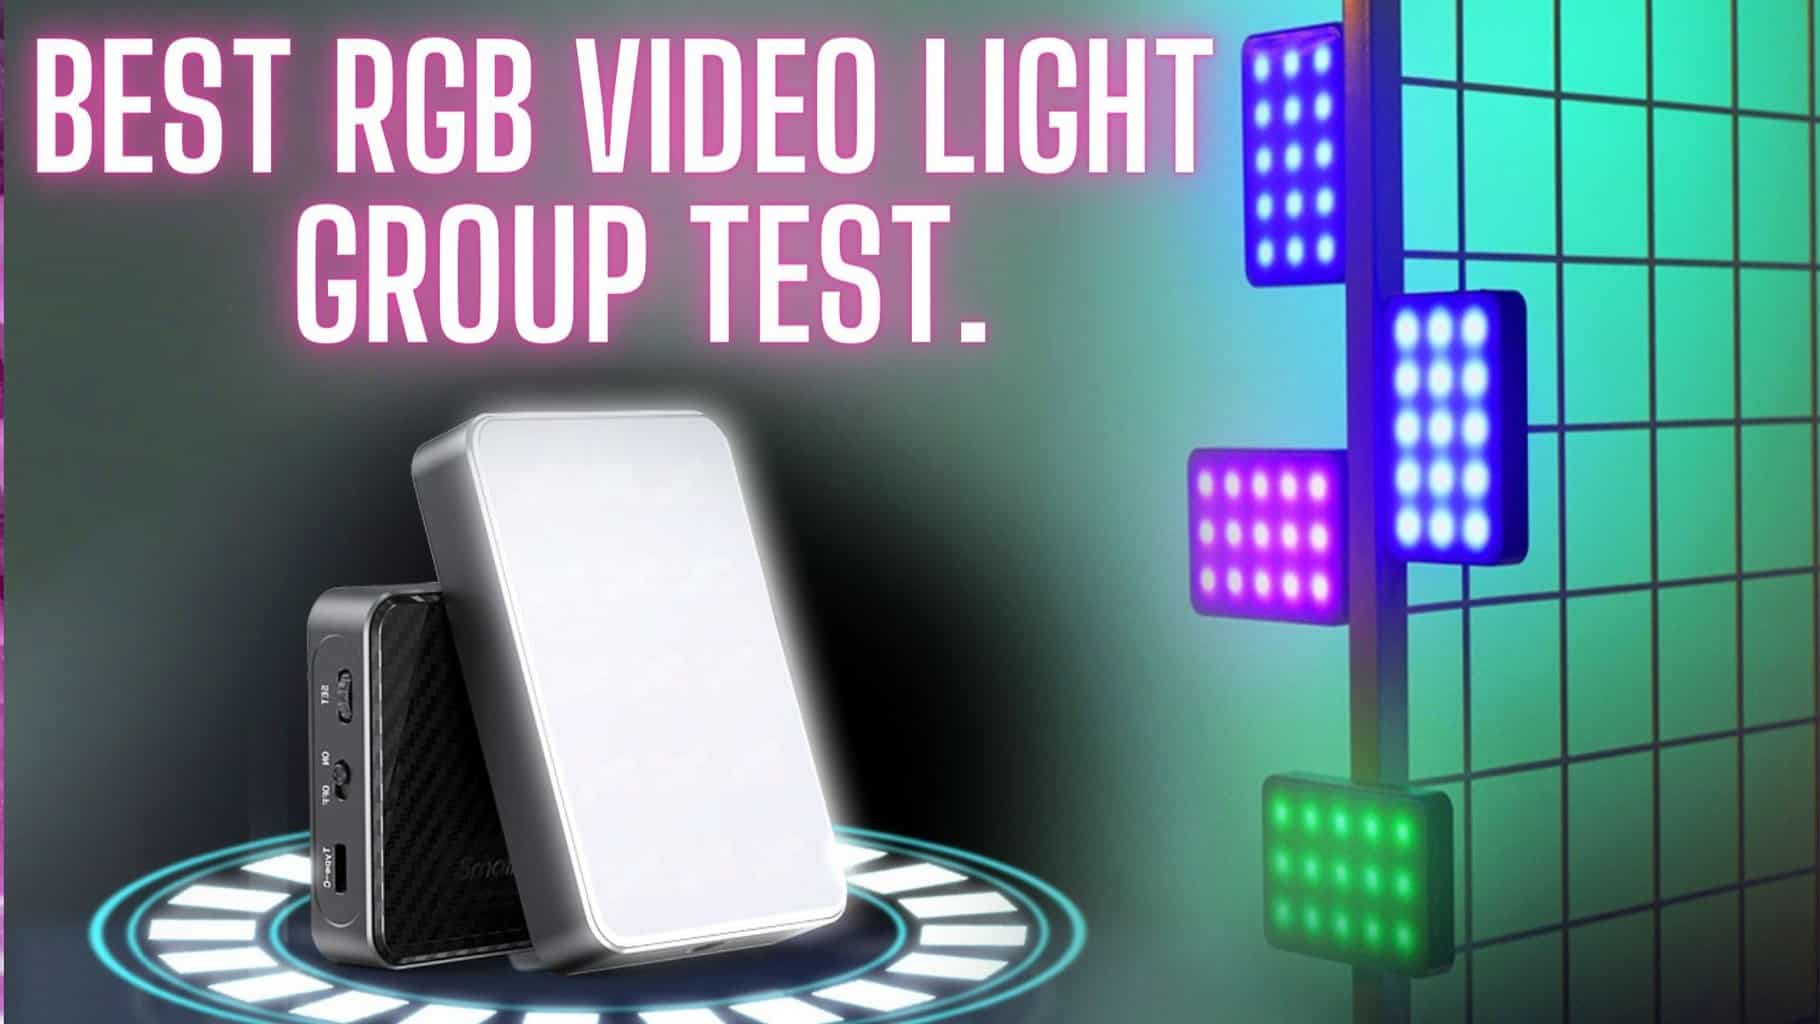 What is the best RGB LED Video Light?